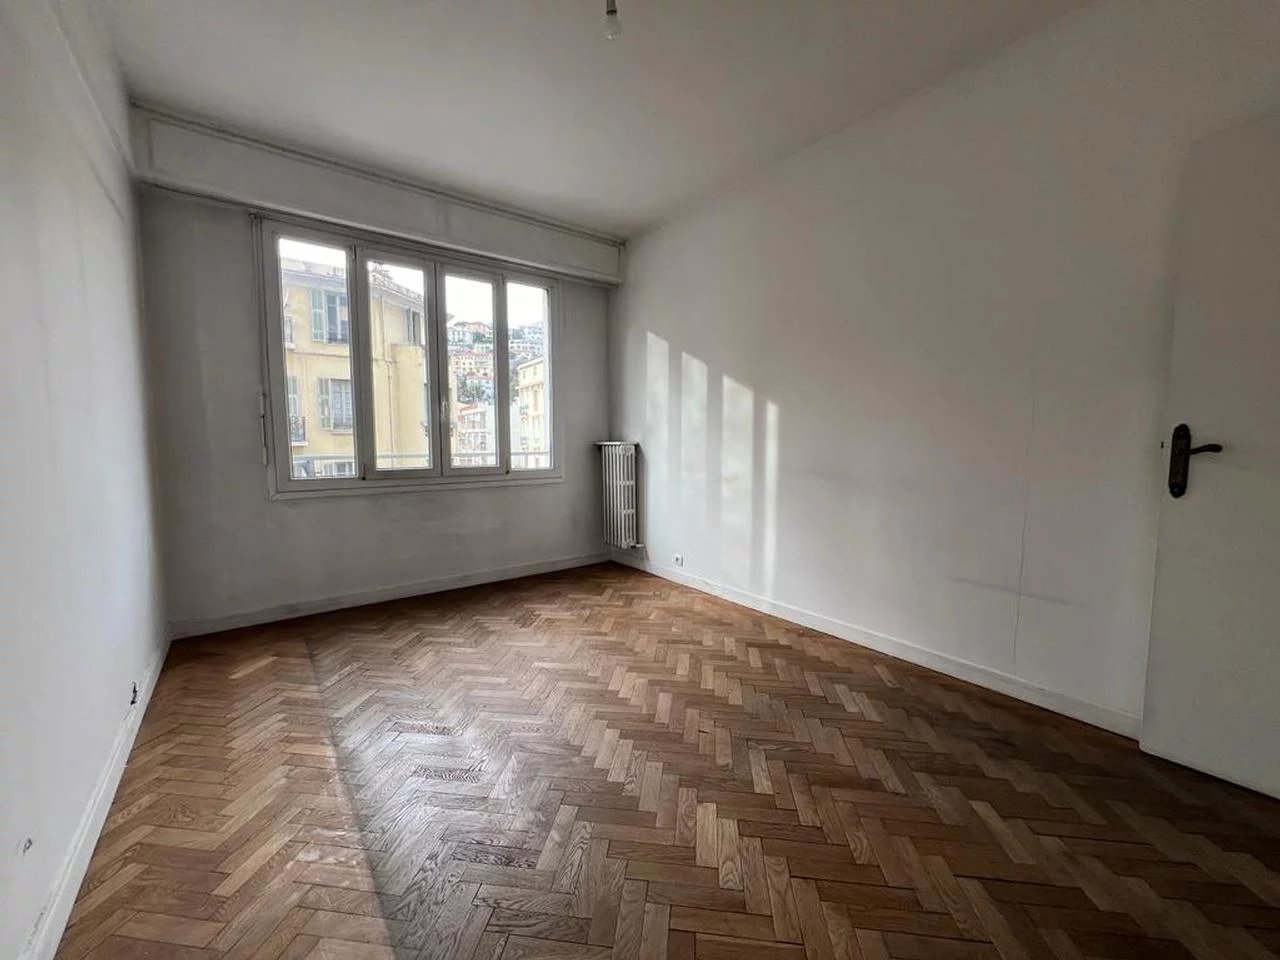 Appartement  2 Rooms 53m2  for sale   235 000 €